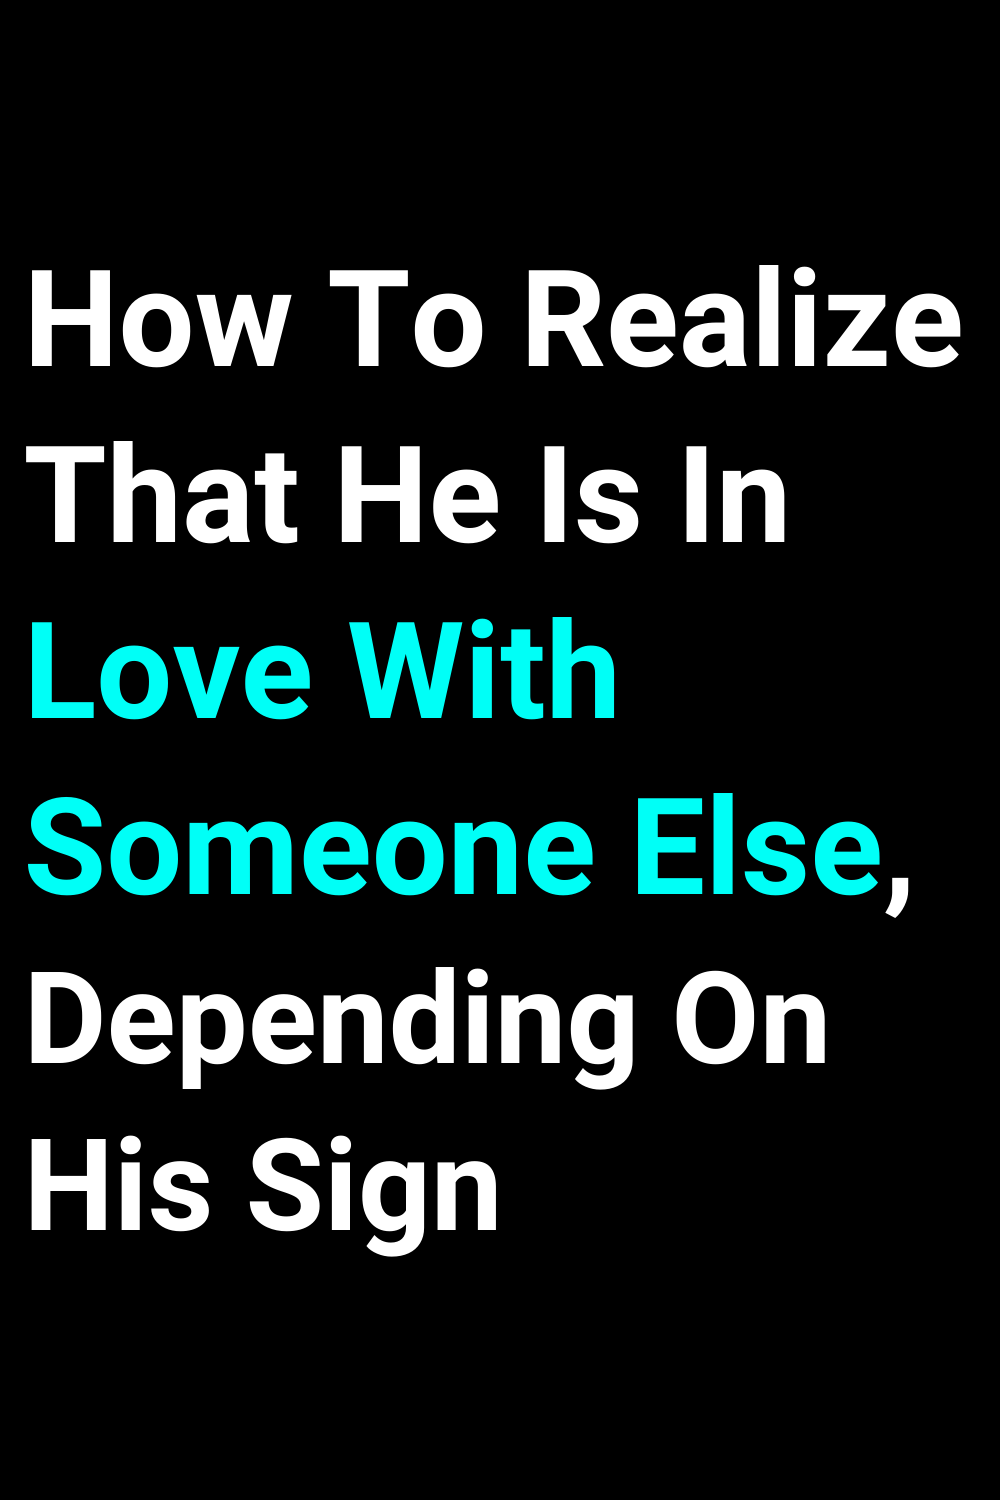 How To Realize That He Is In Love With Someone Else, Depending On His Sign